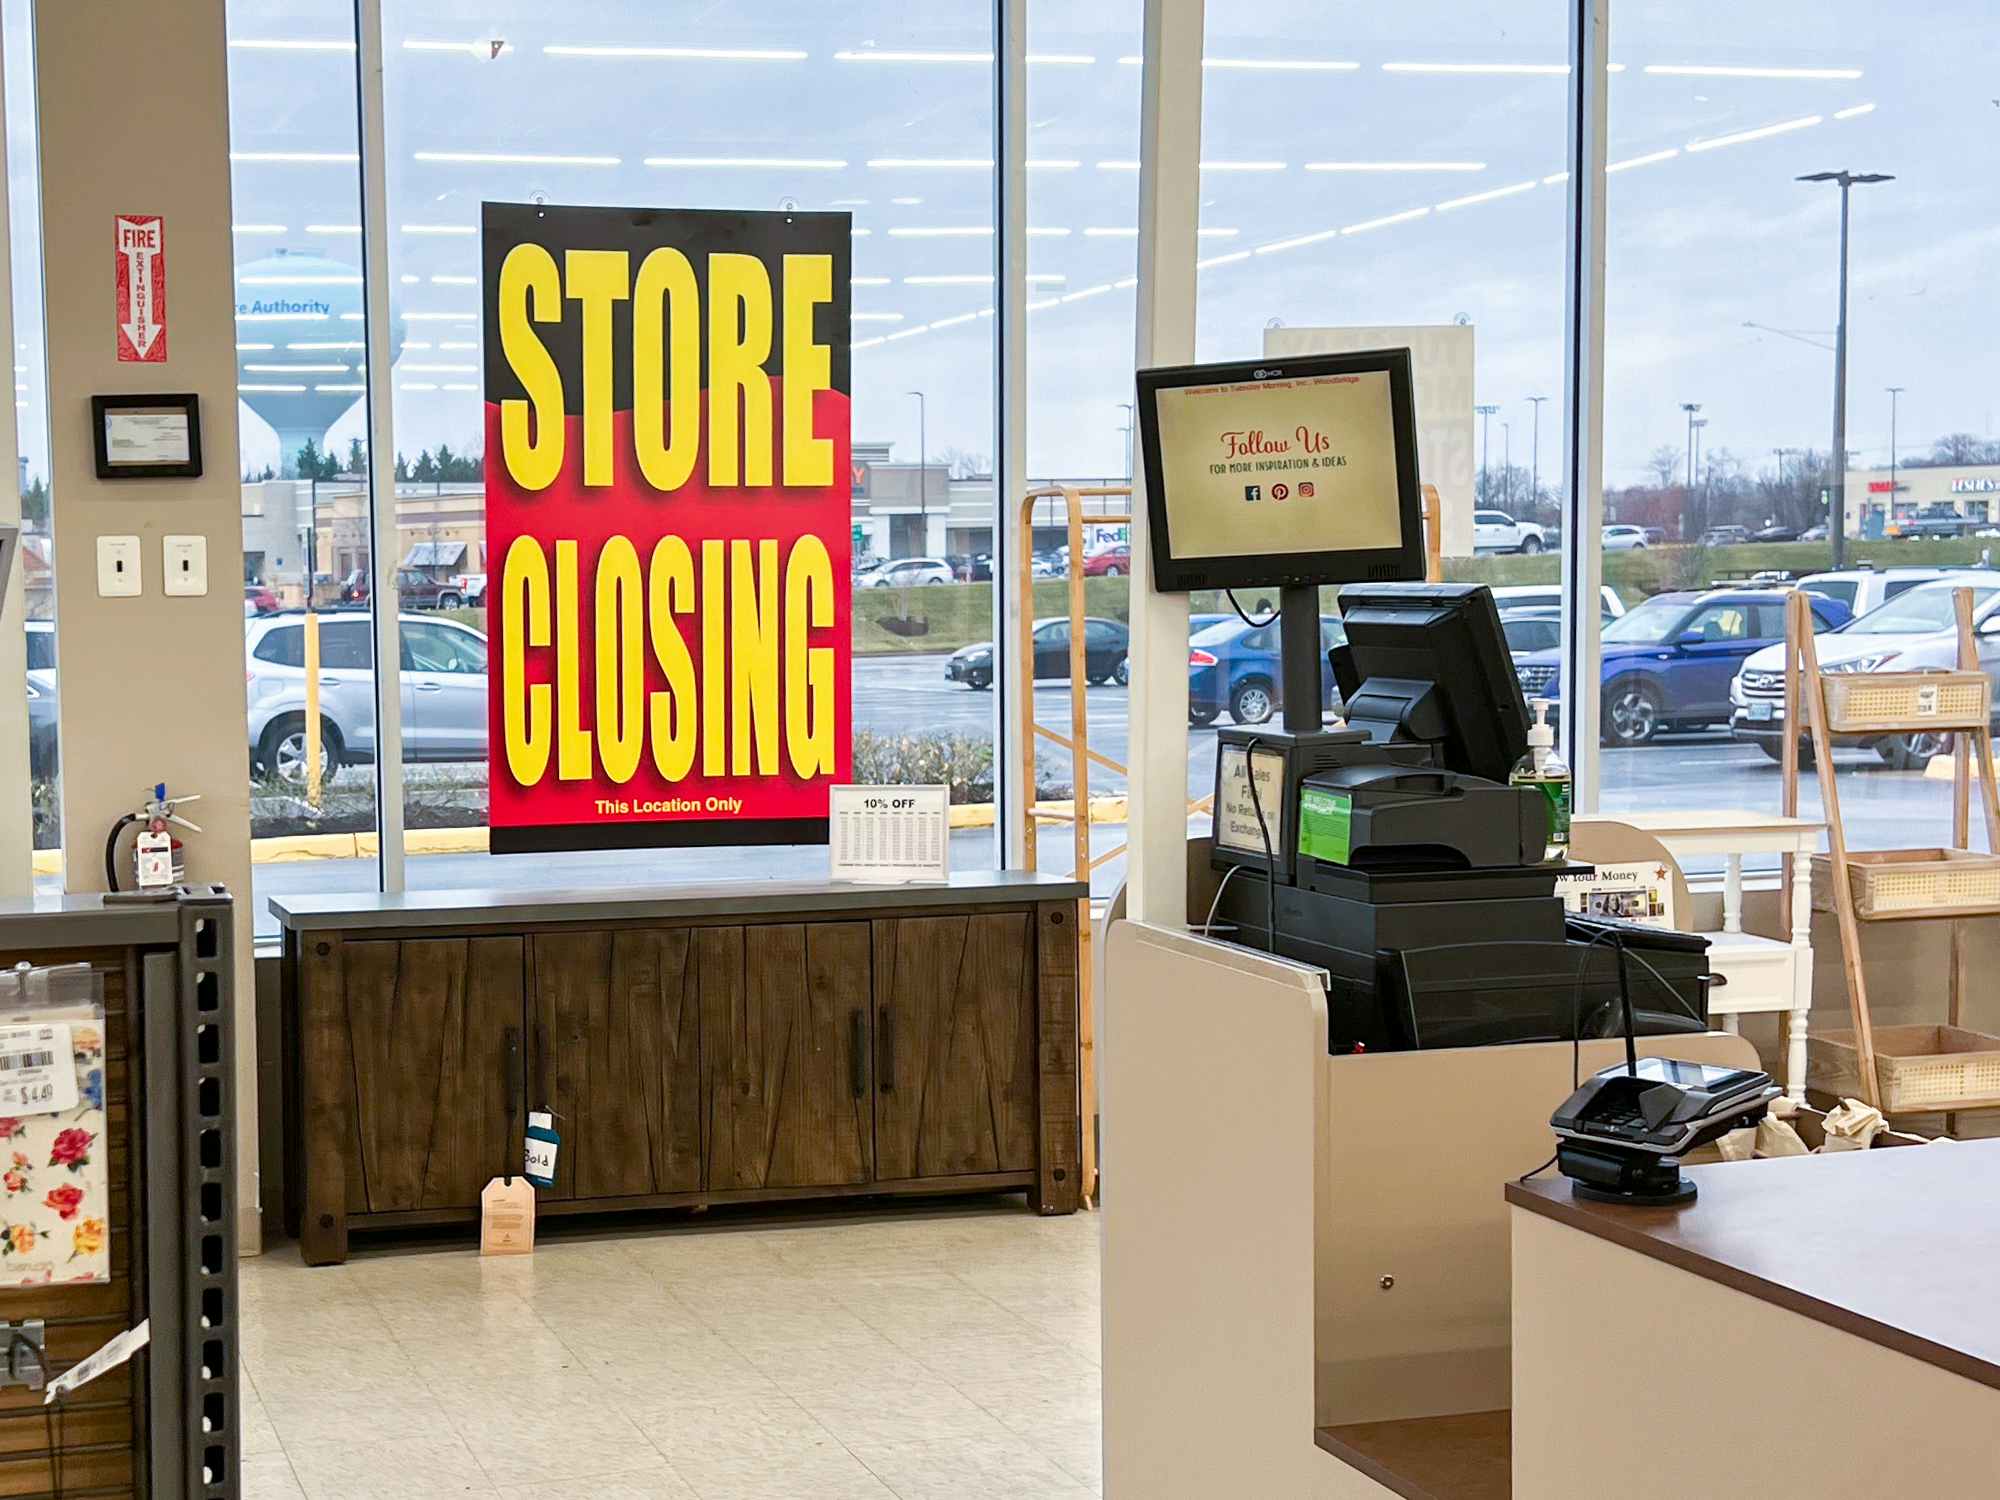 Tuesday Morning is closing all stores